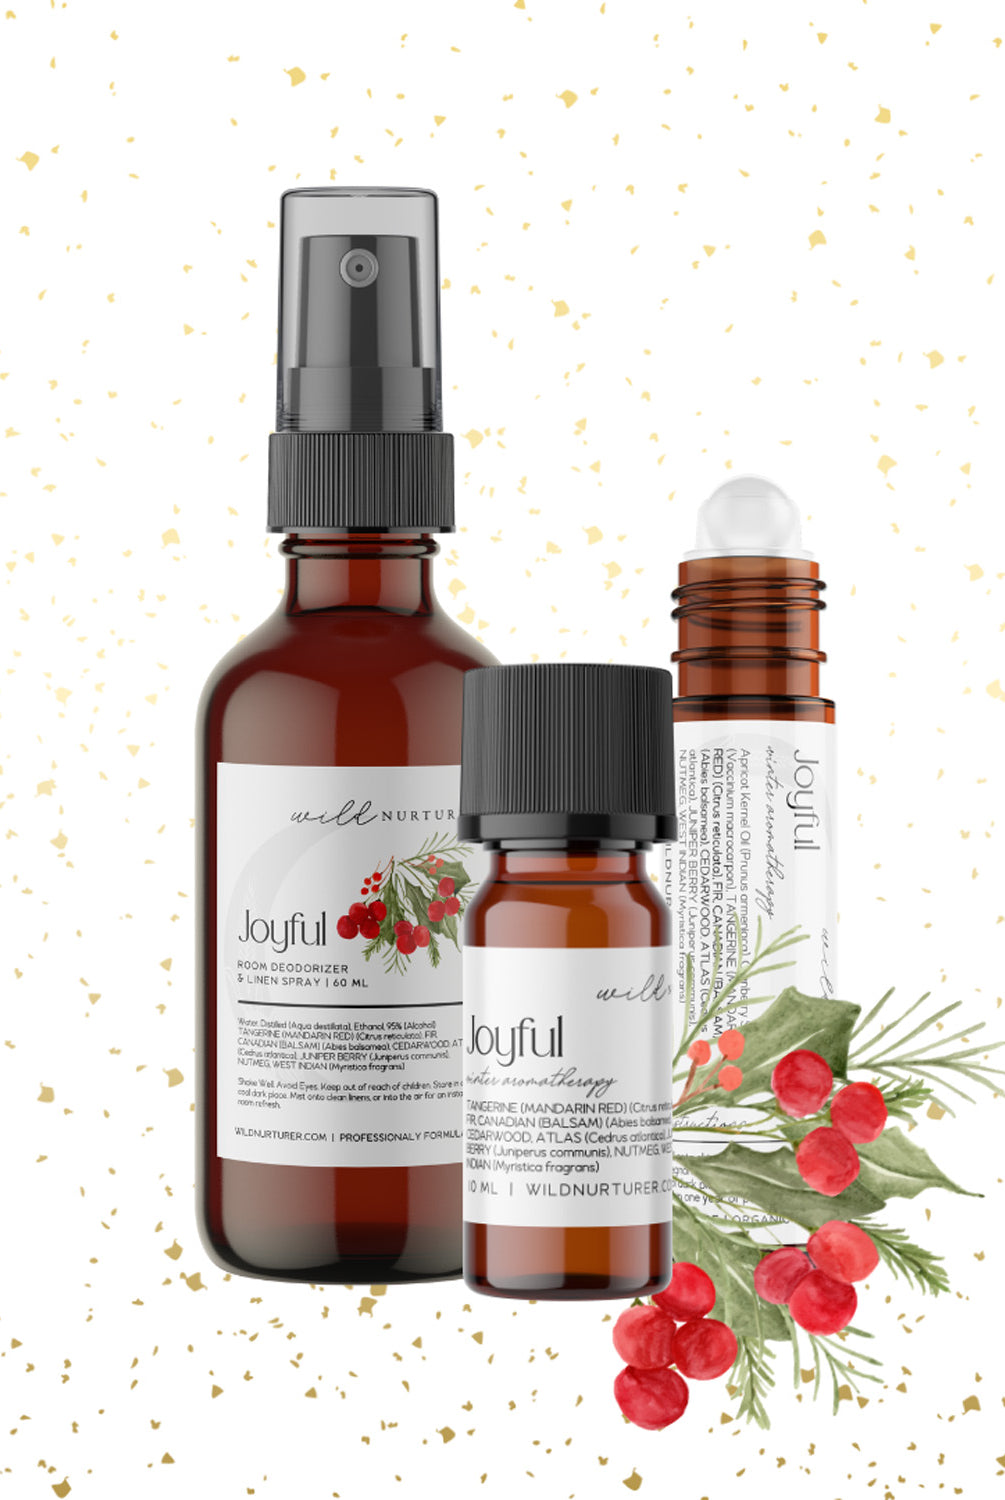 Two bottles of "Joyful Aromatherapy Holiday Blend" skincare products by Wild Nurturer Aromatherapy, with a spray and dropper, decorated with botanical illustrations and a gold confetti background.